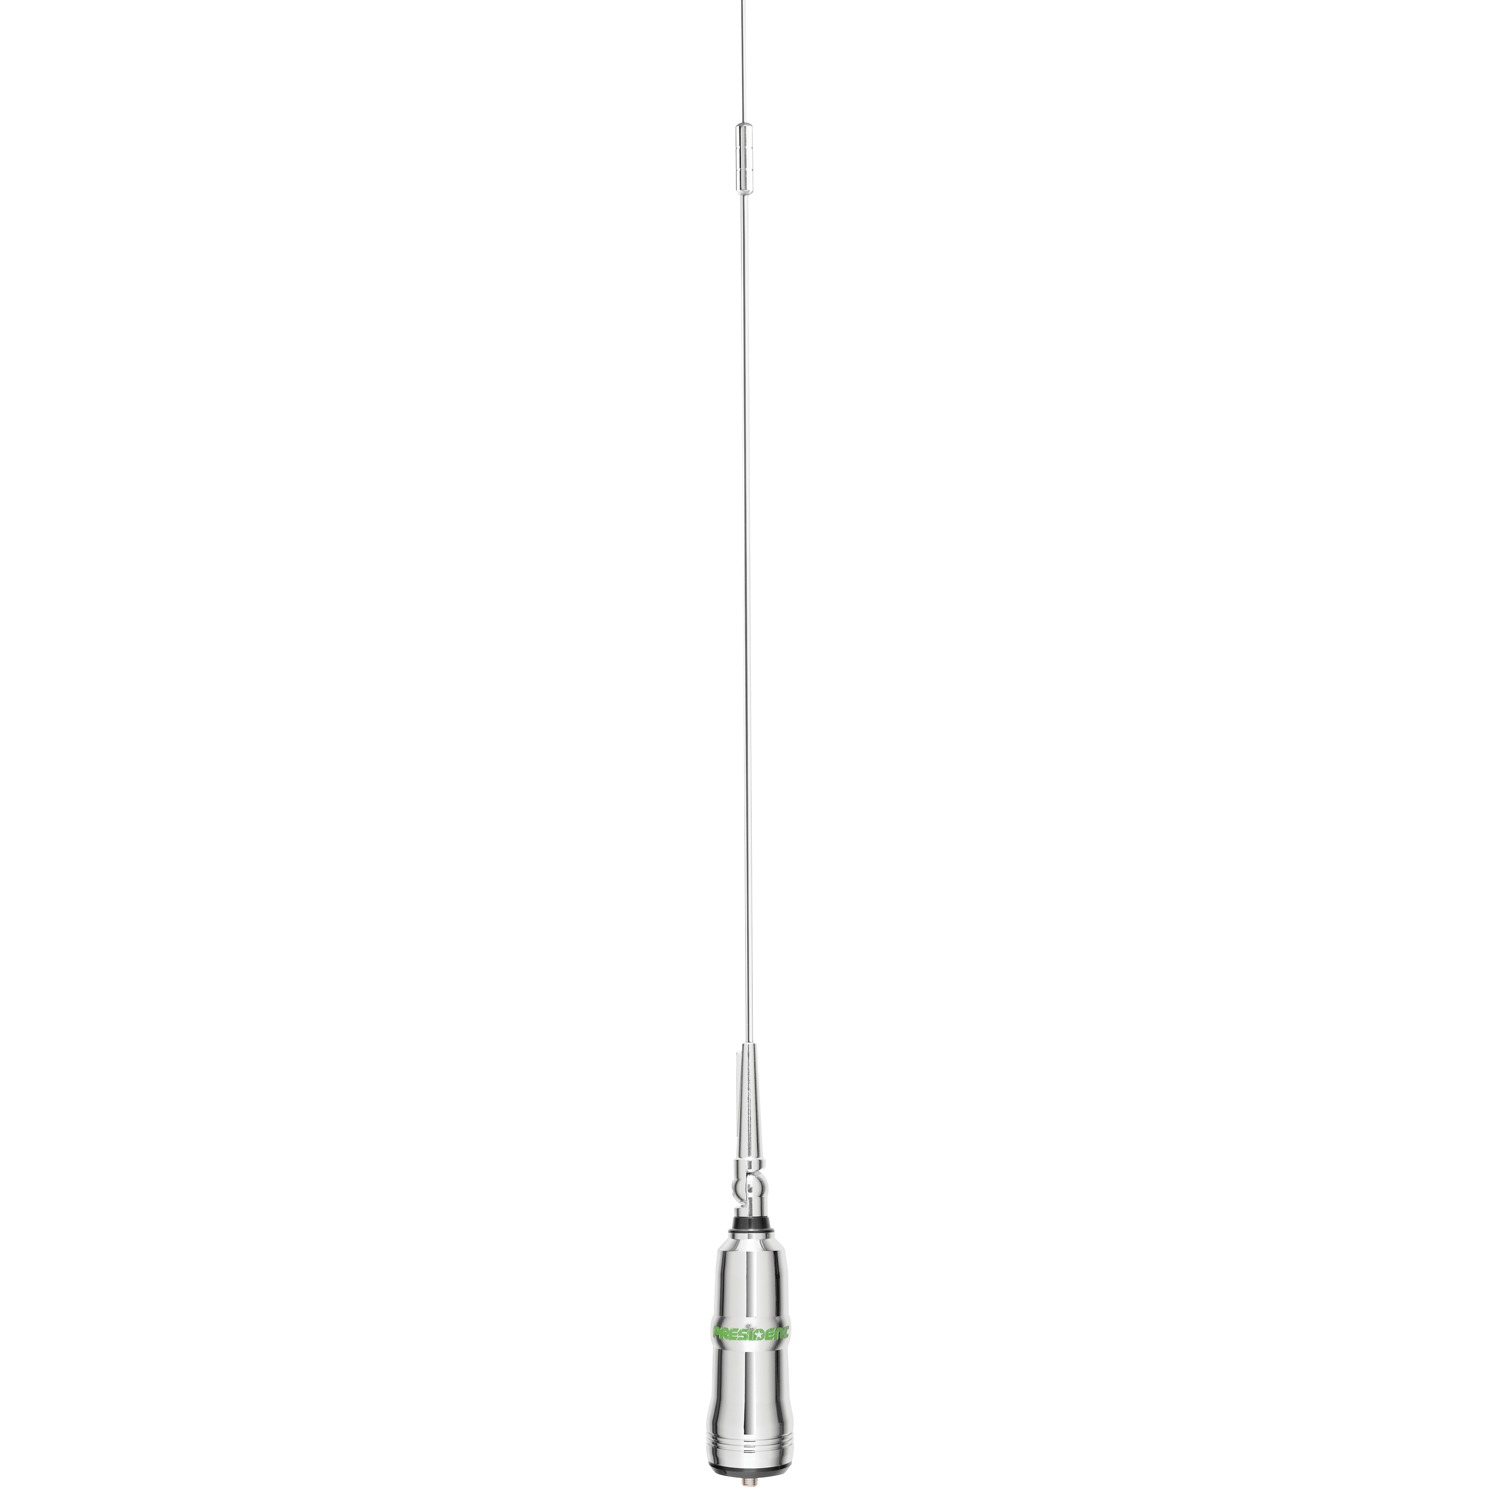 President - 83.46" Tall 2,400 Channel Wide Band 7,200 Watt 7/8 Wave 3/8X24 Thread 10/11 Meter Antenna With Stainless Whip, Wx Ch